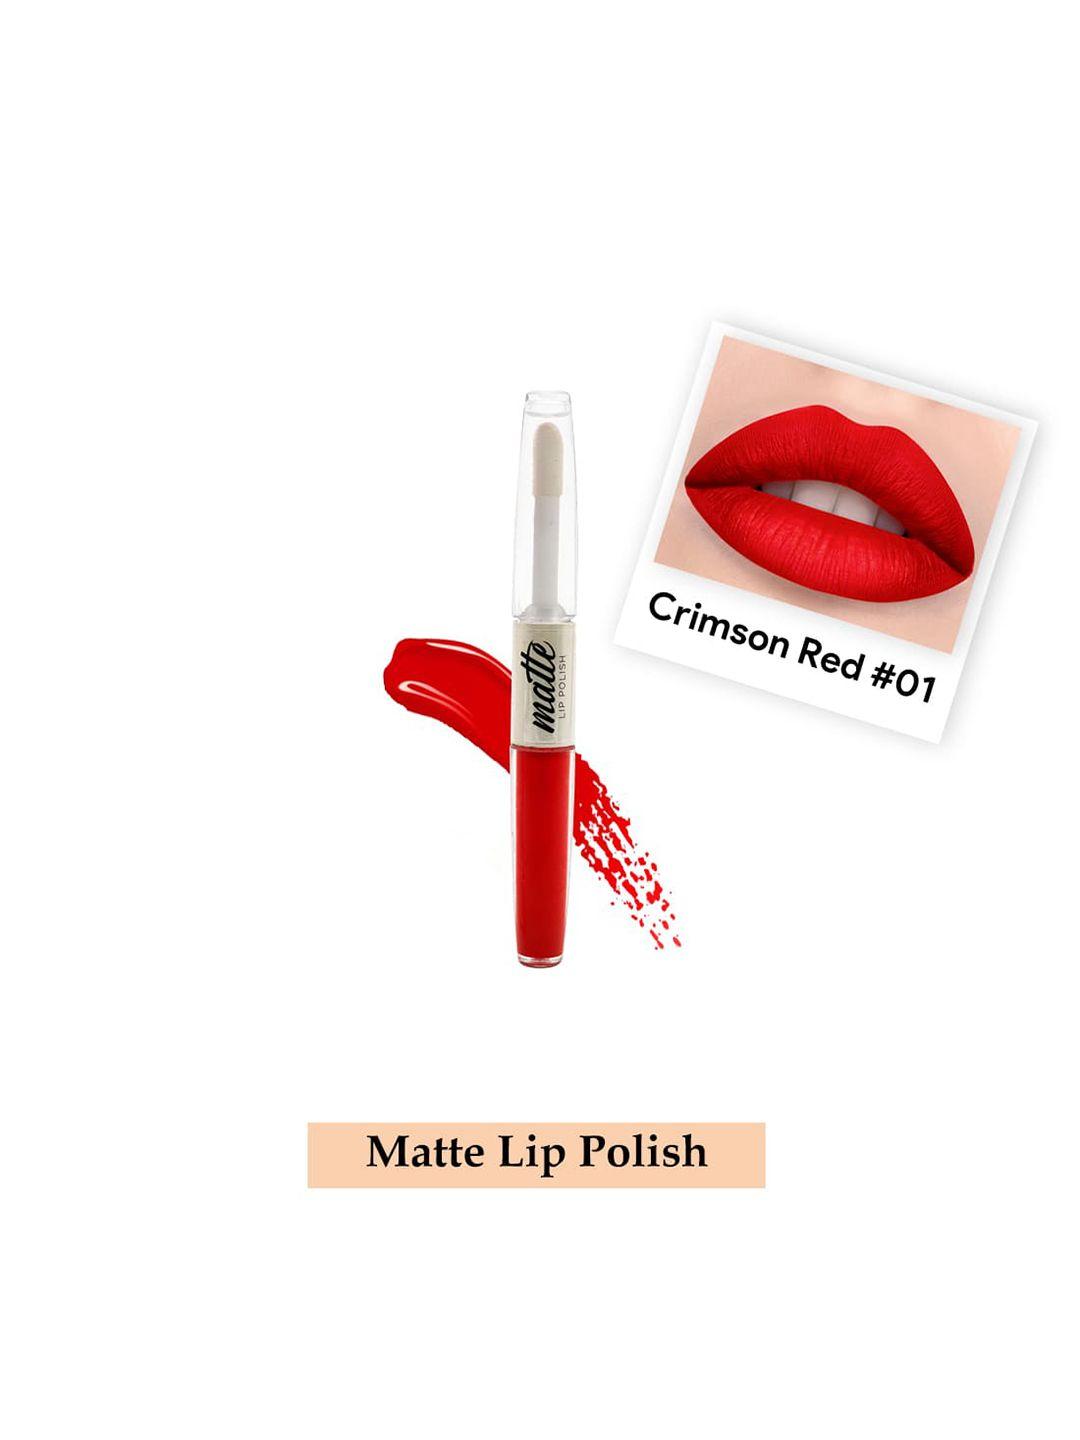 beautyrelay london marker 24 hours comfortable color 2 in 1 matte lipstick 5g - crimson red 01